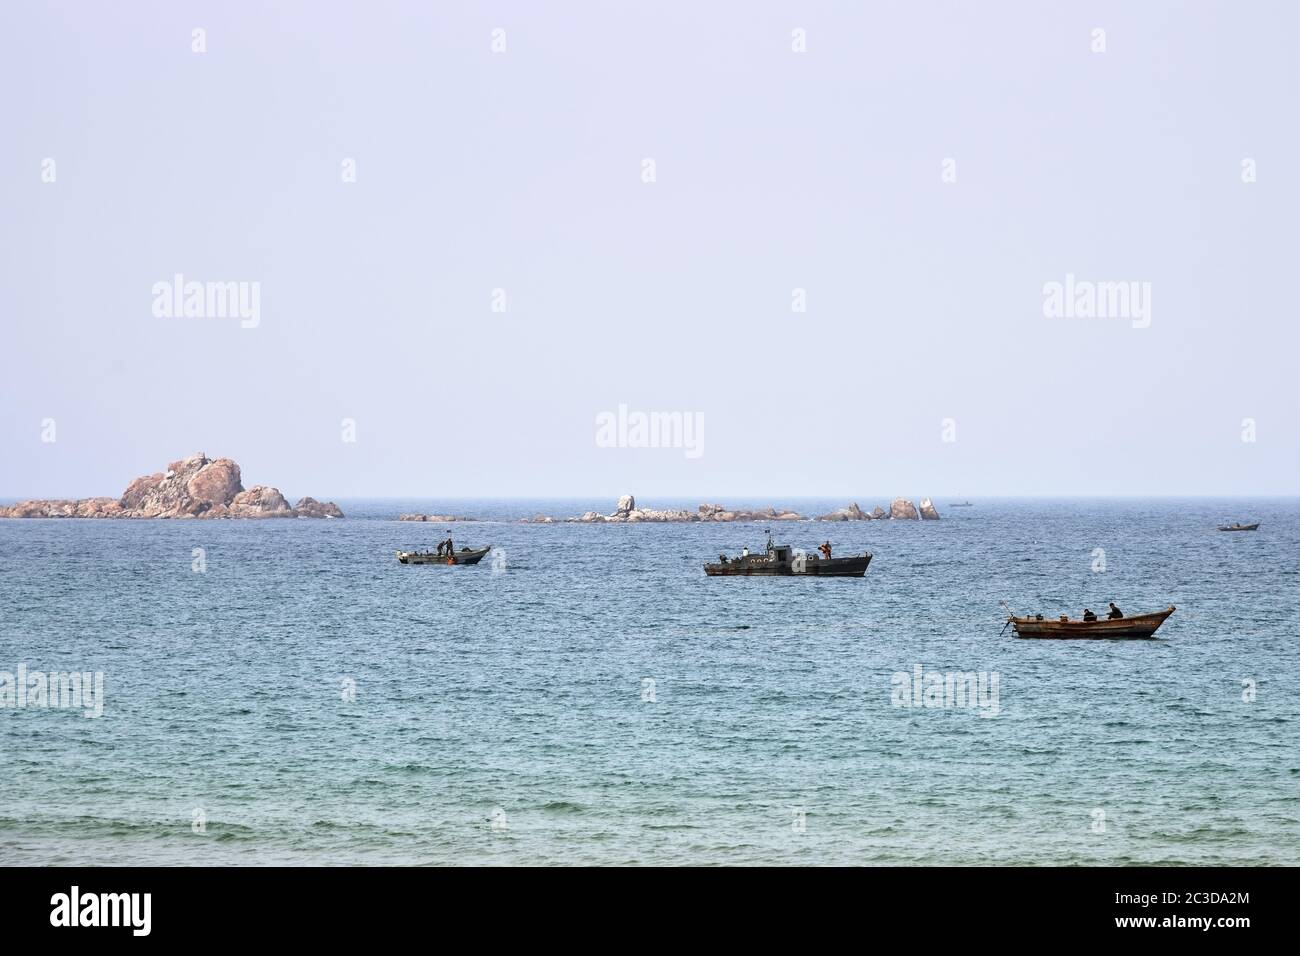 North Korea - May 4, 2019: Small island, two military boats carry out underwater work and fishing boat in Sea of Japan or East Sea Stock Photo